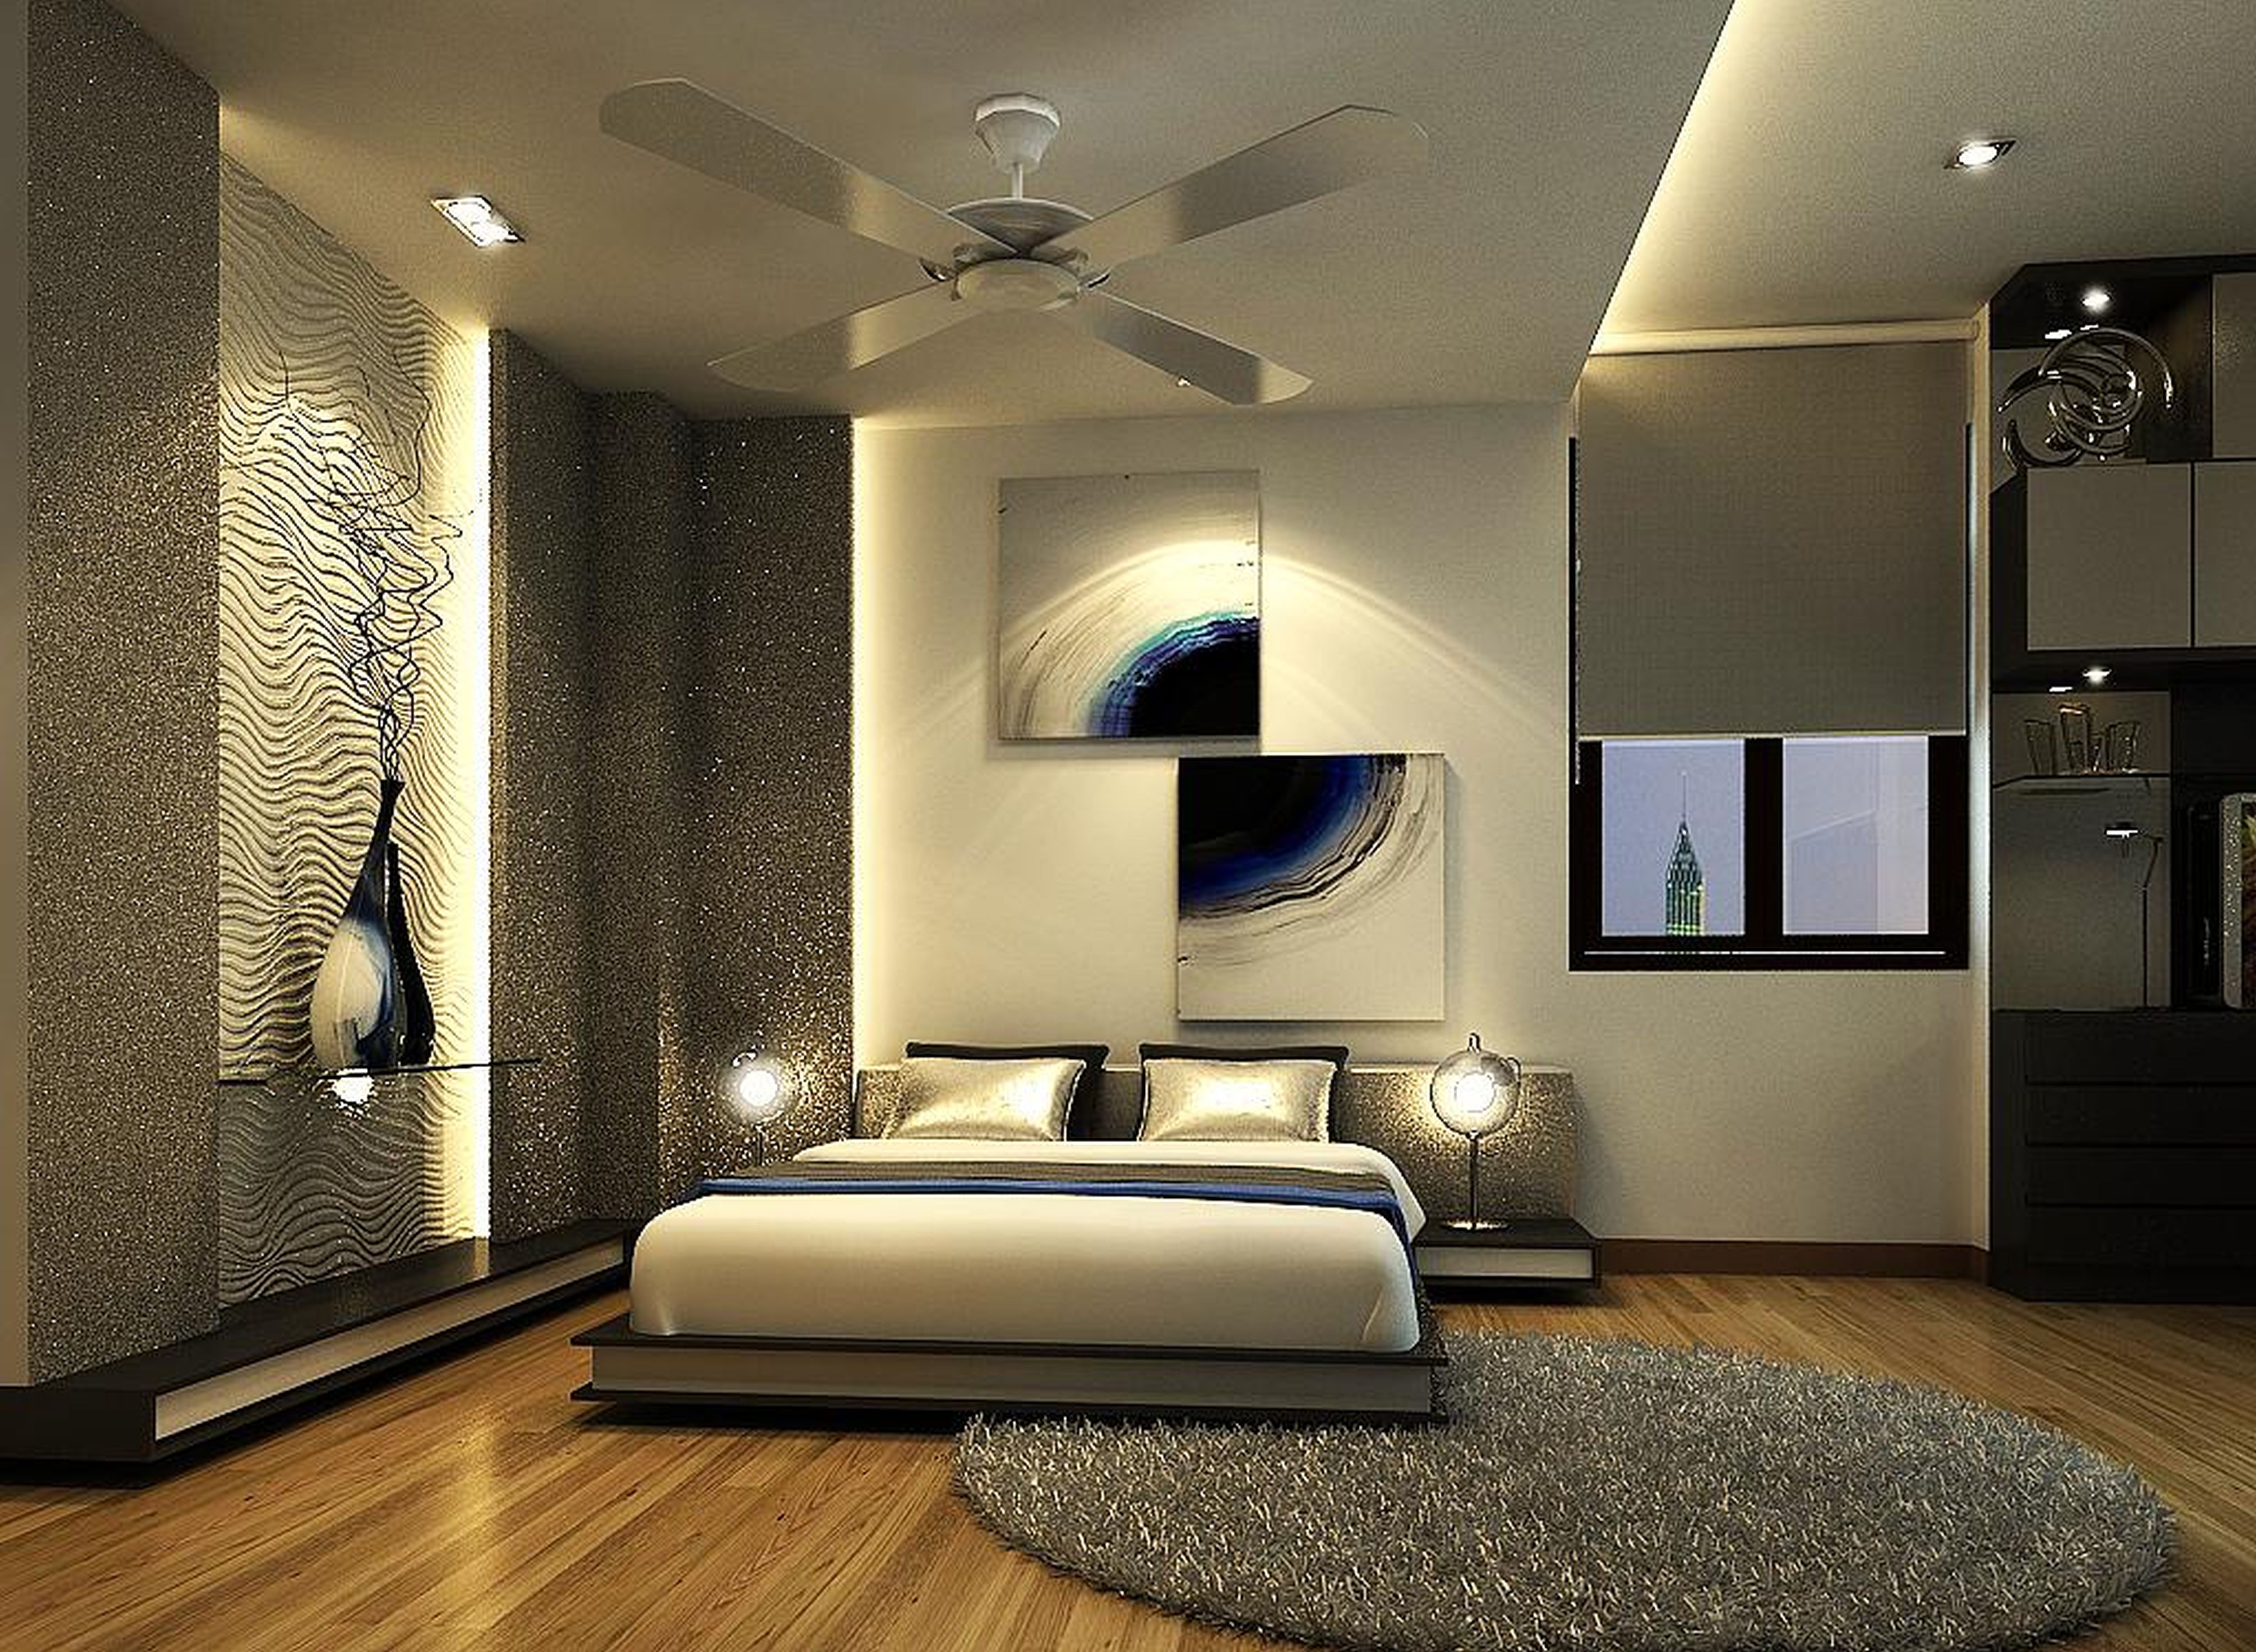 bedroom inspiration interior room designs modern bed bedrooms ceiling decorating beautiful paint style elegant apartment small table